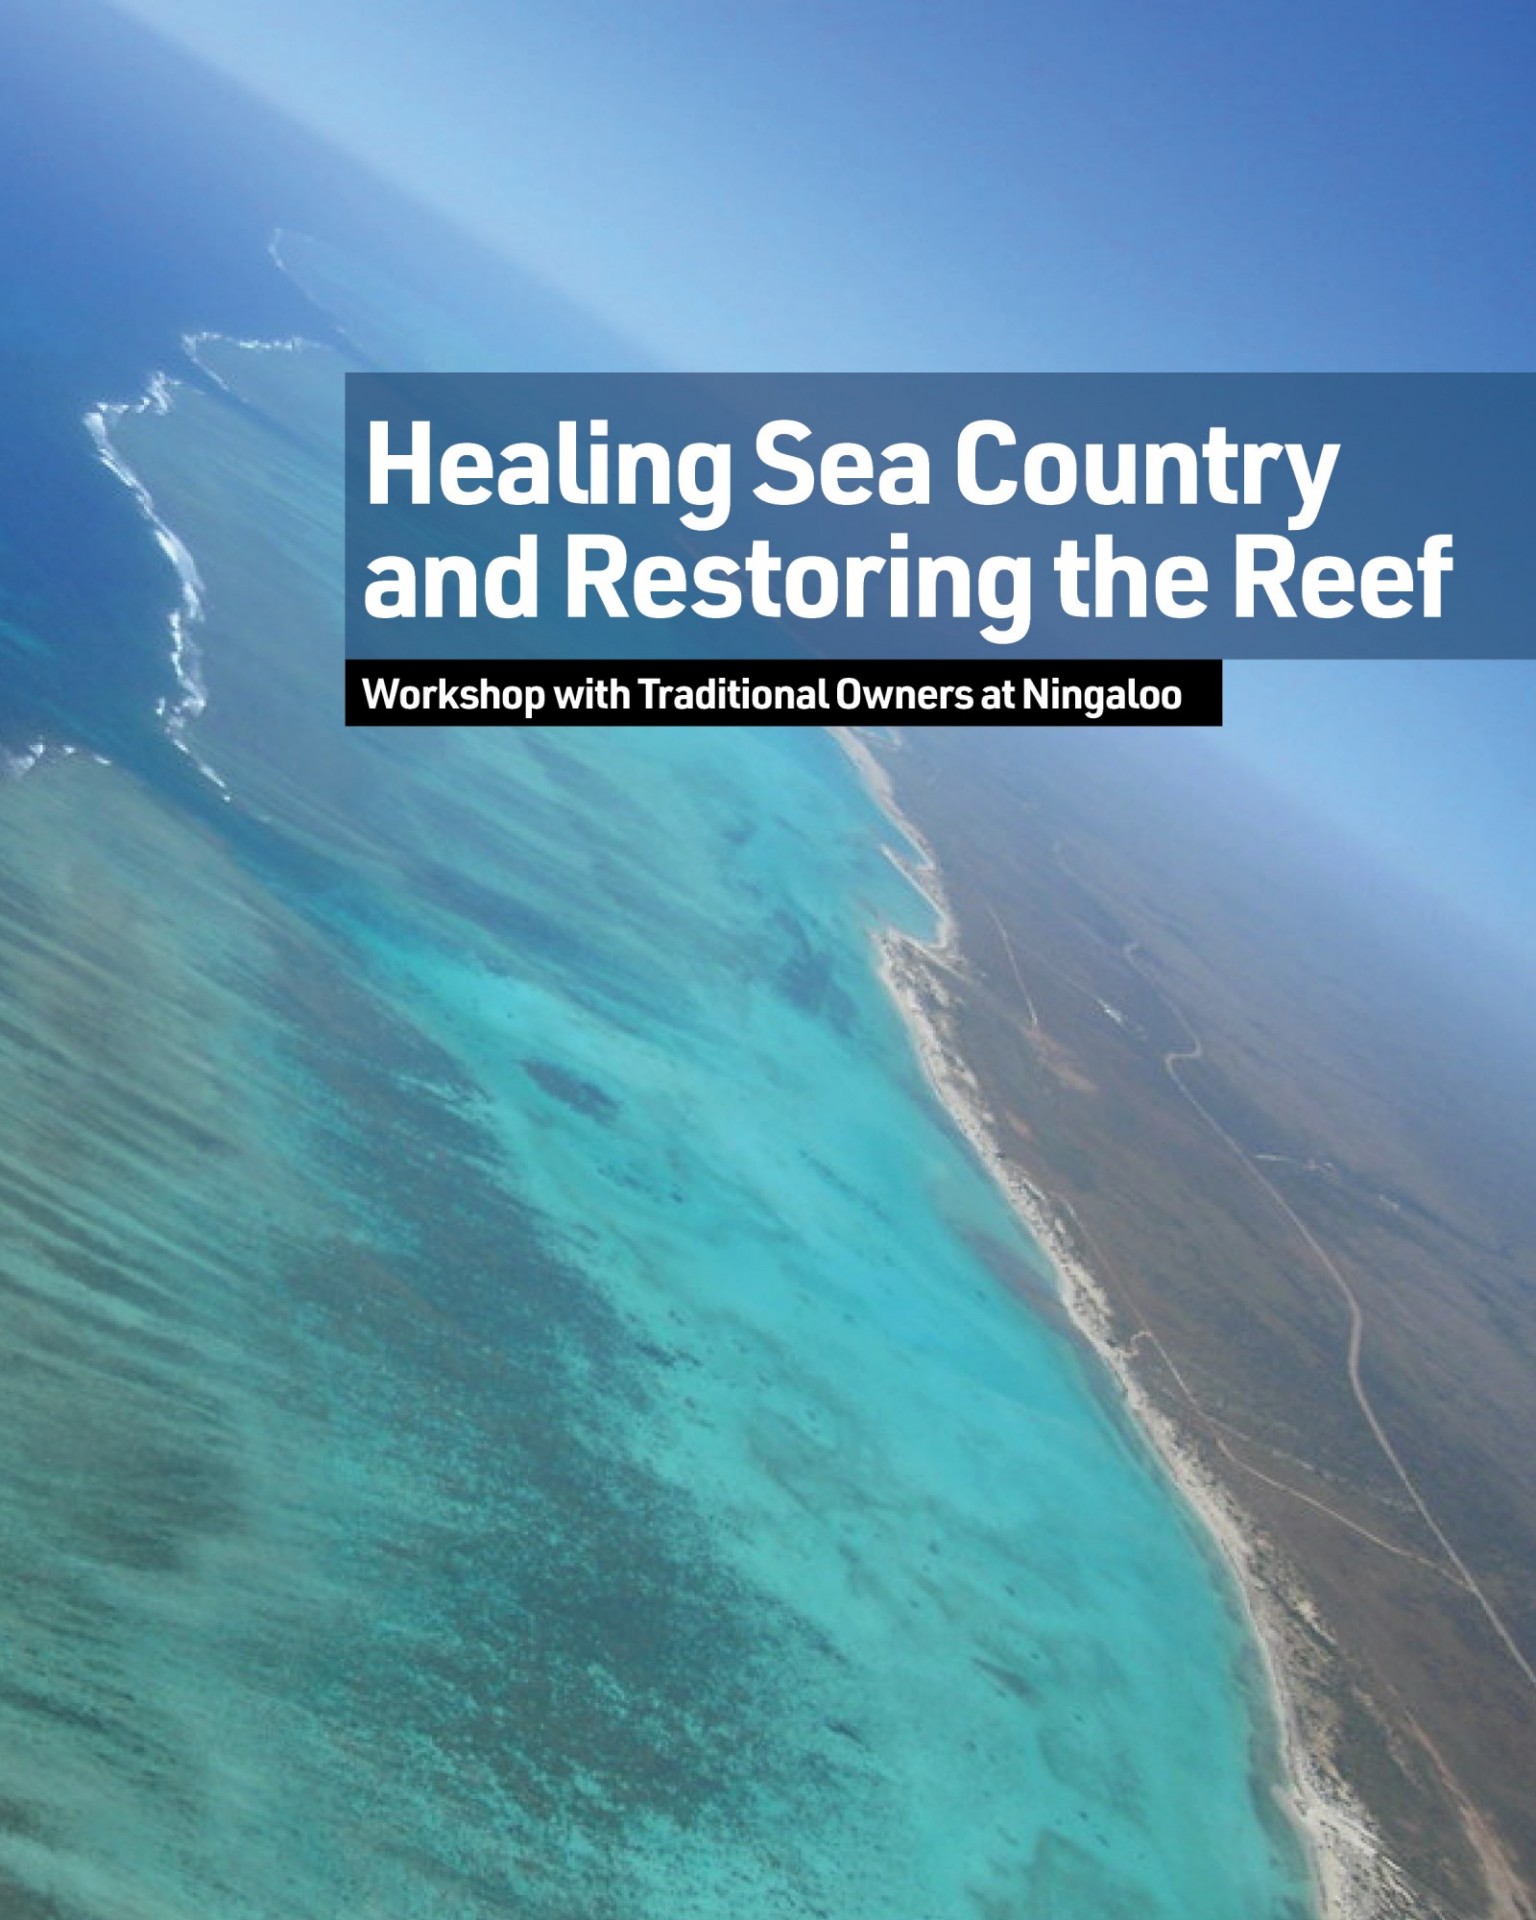 Healing Sea Country and Restoring the Reef